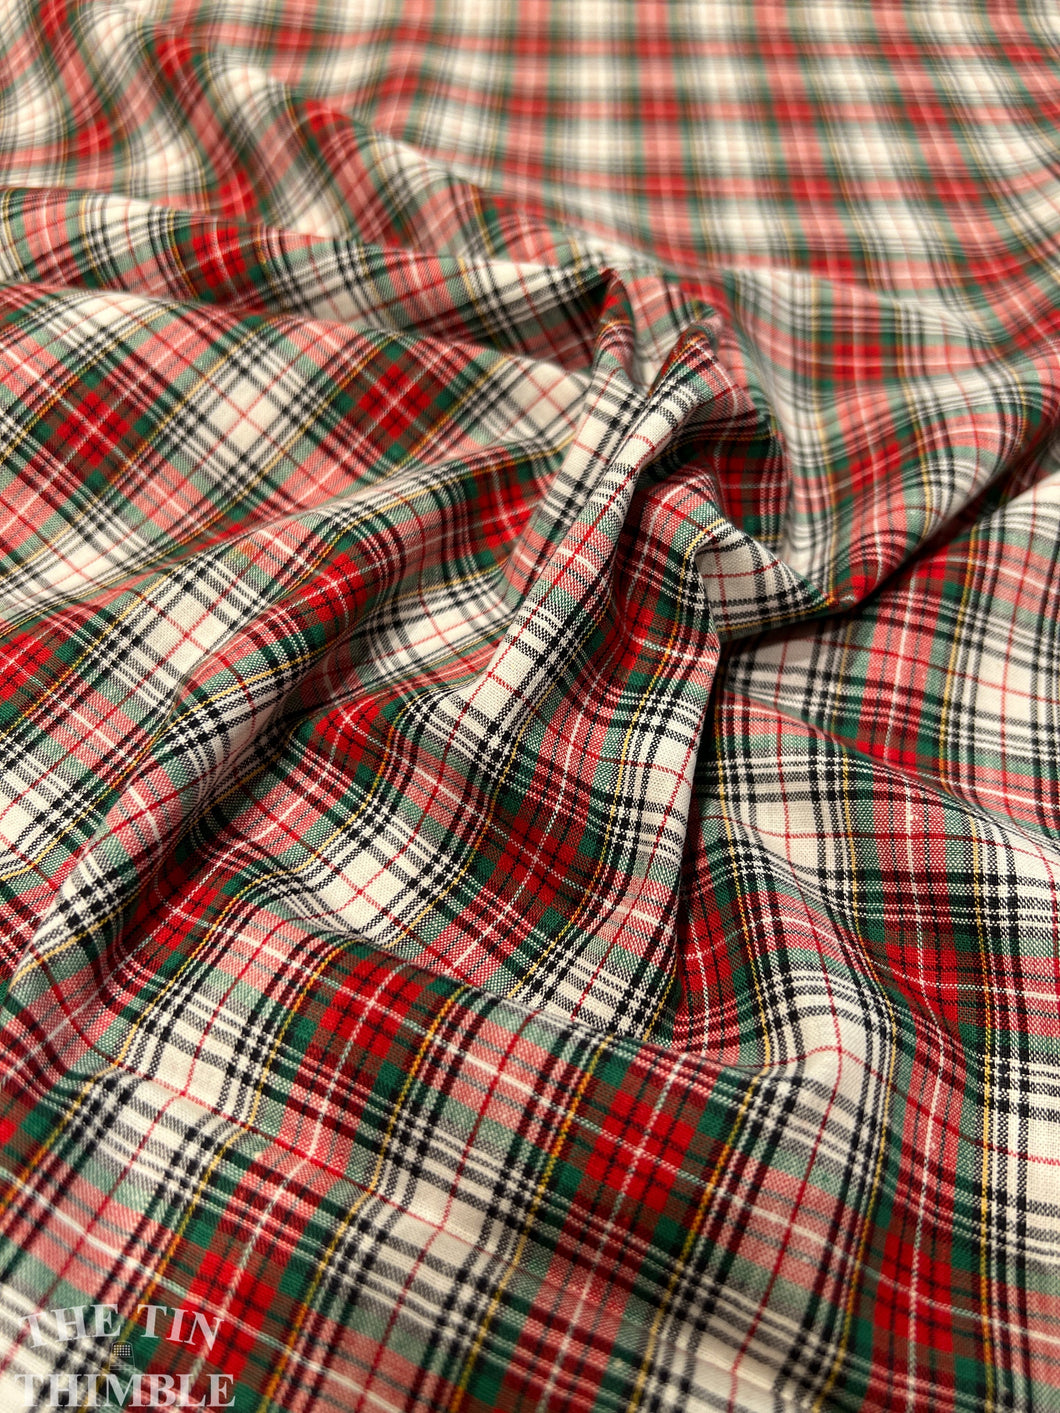 Authentic Vintage Red and Green Yarn Dyed Plaid Cotton - 1 5/8 Yards-  Sanforized 